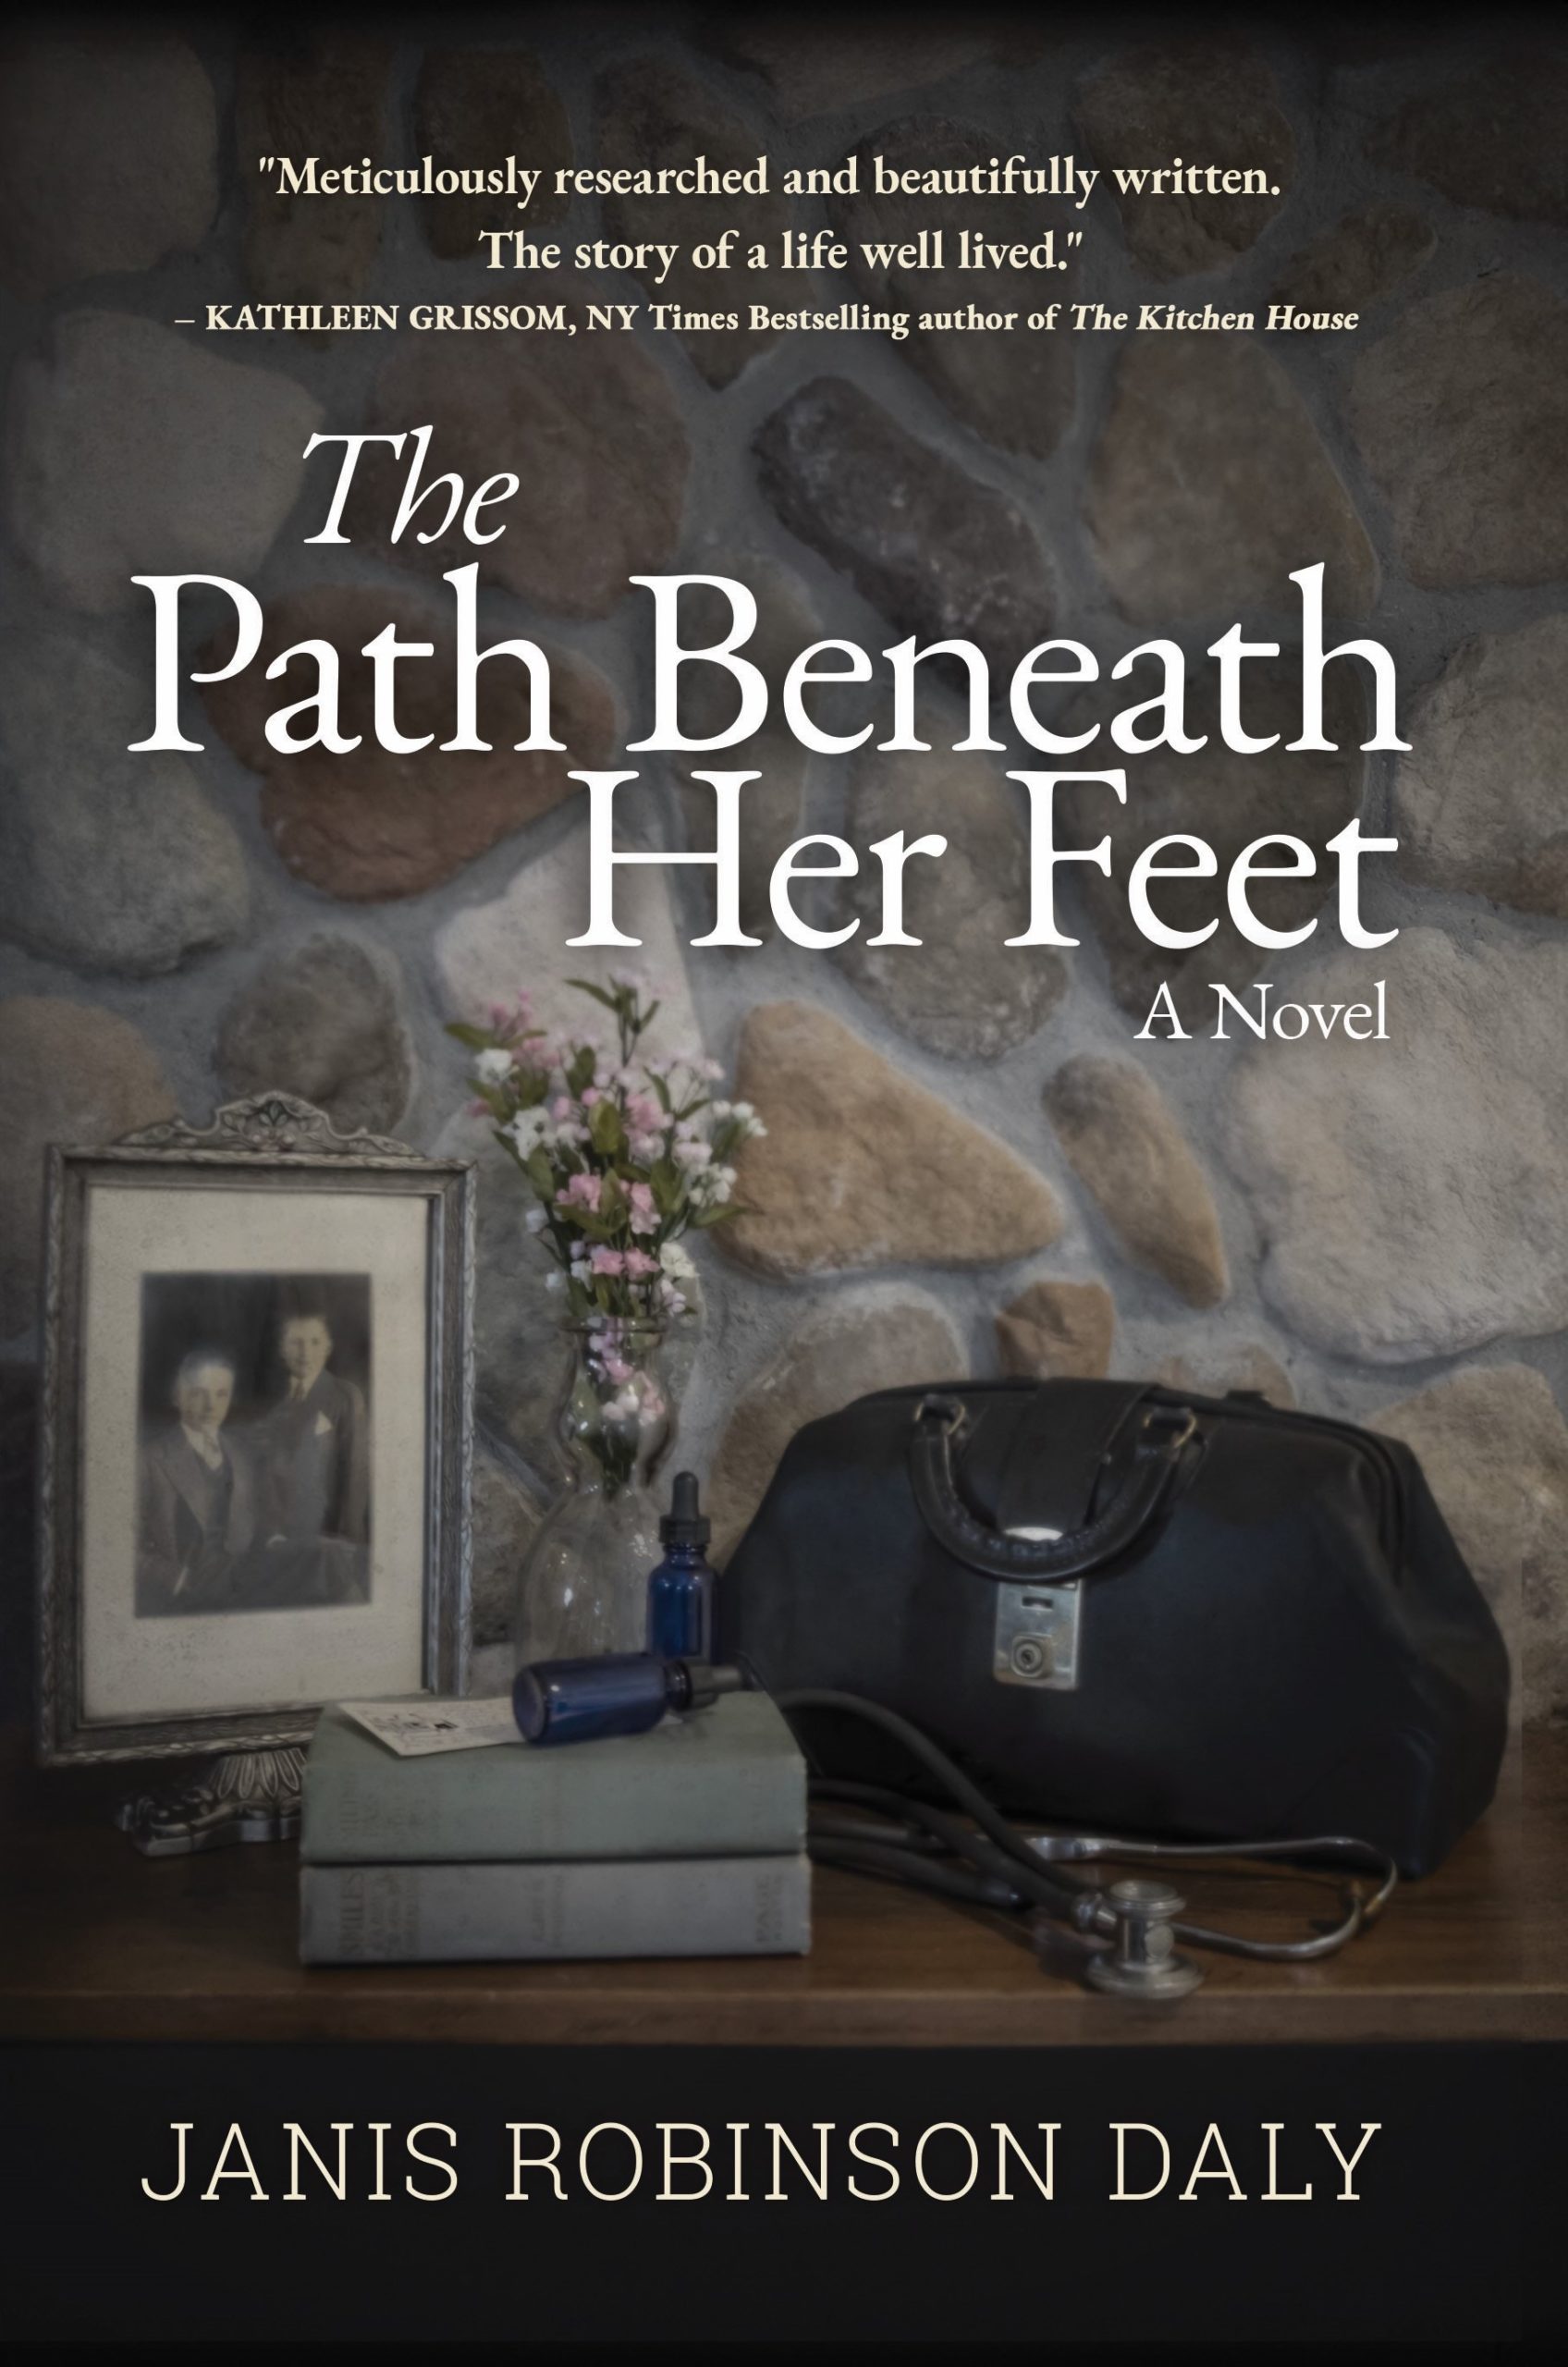 The Path Beneath Her Feet full cover copy